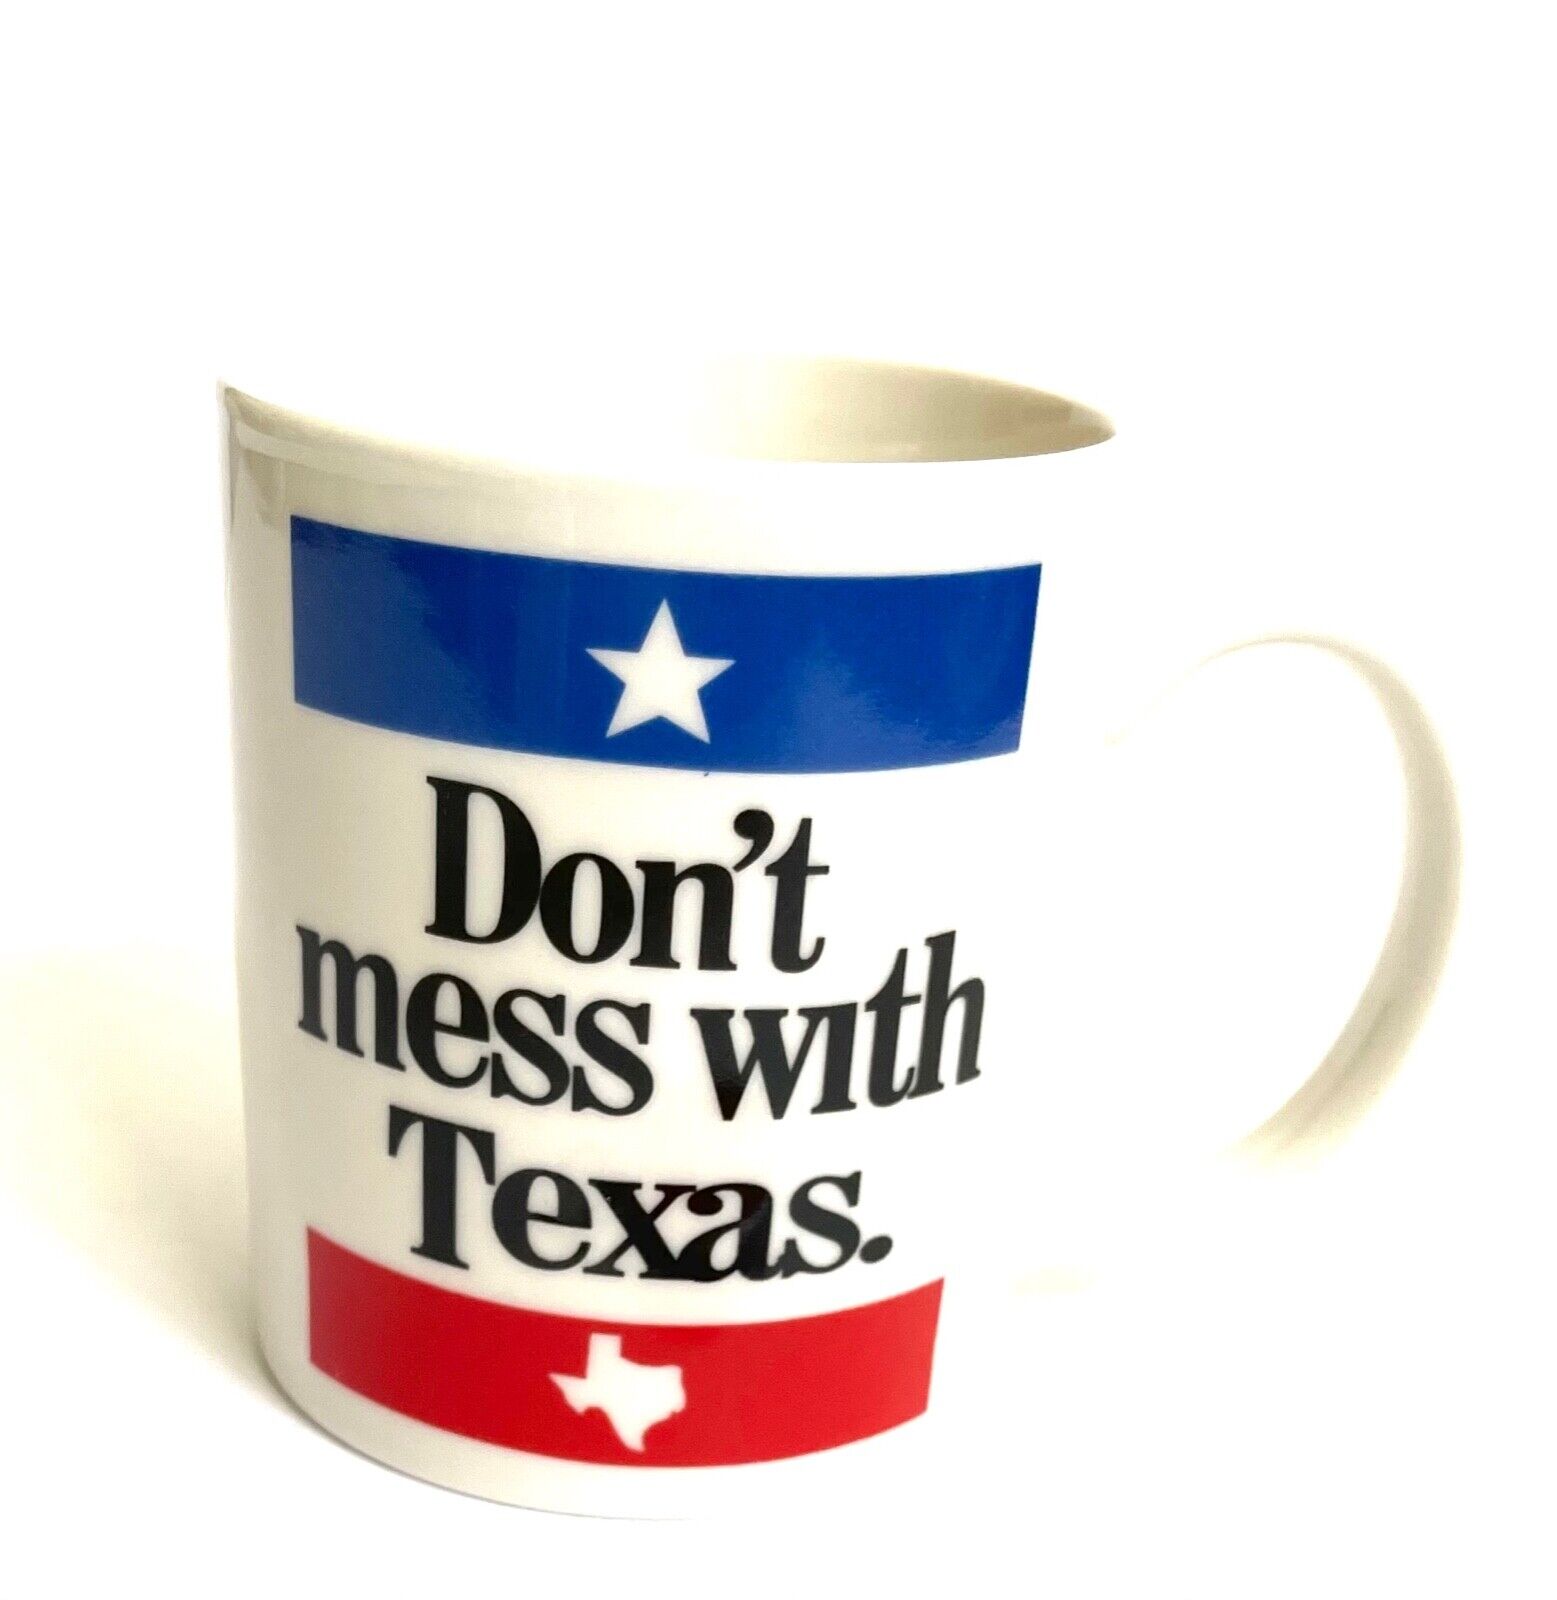  Don't Mess With Texas Standard Size Coffee Mug Cup 